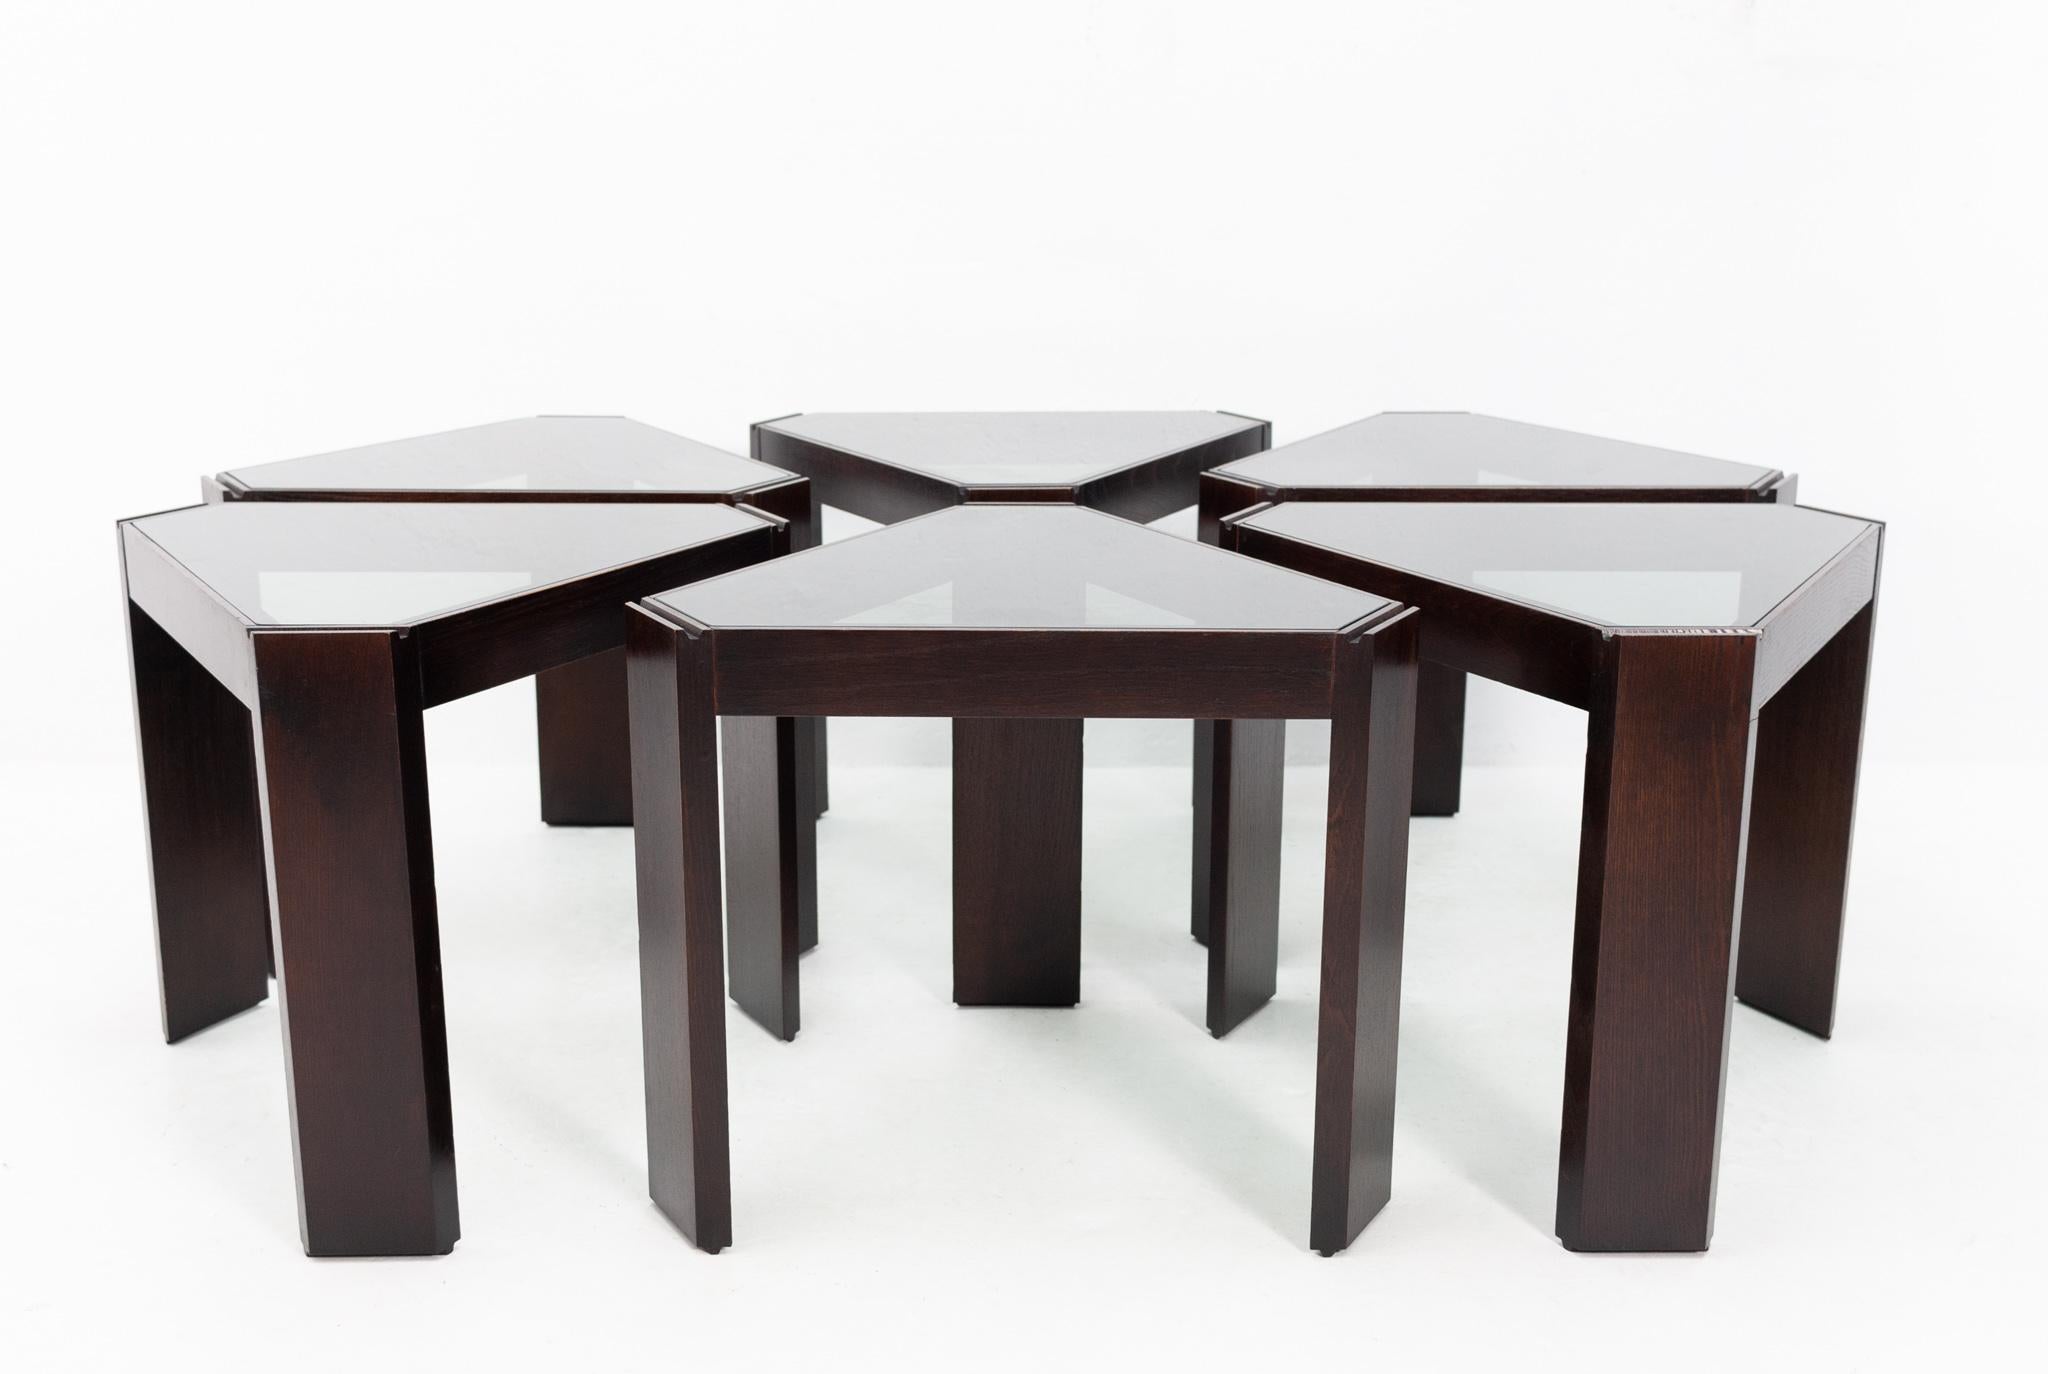 These six stacking tables were made by Porada Arredi in Italy, 1970s they can be arranged in many different ways. The frames are made of dark walnut wood and the tops of smoked glass. Very good condition. Complete set of six.
 